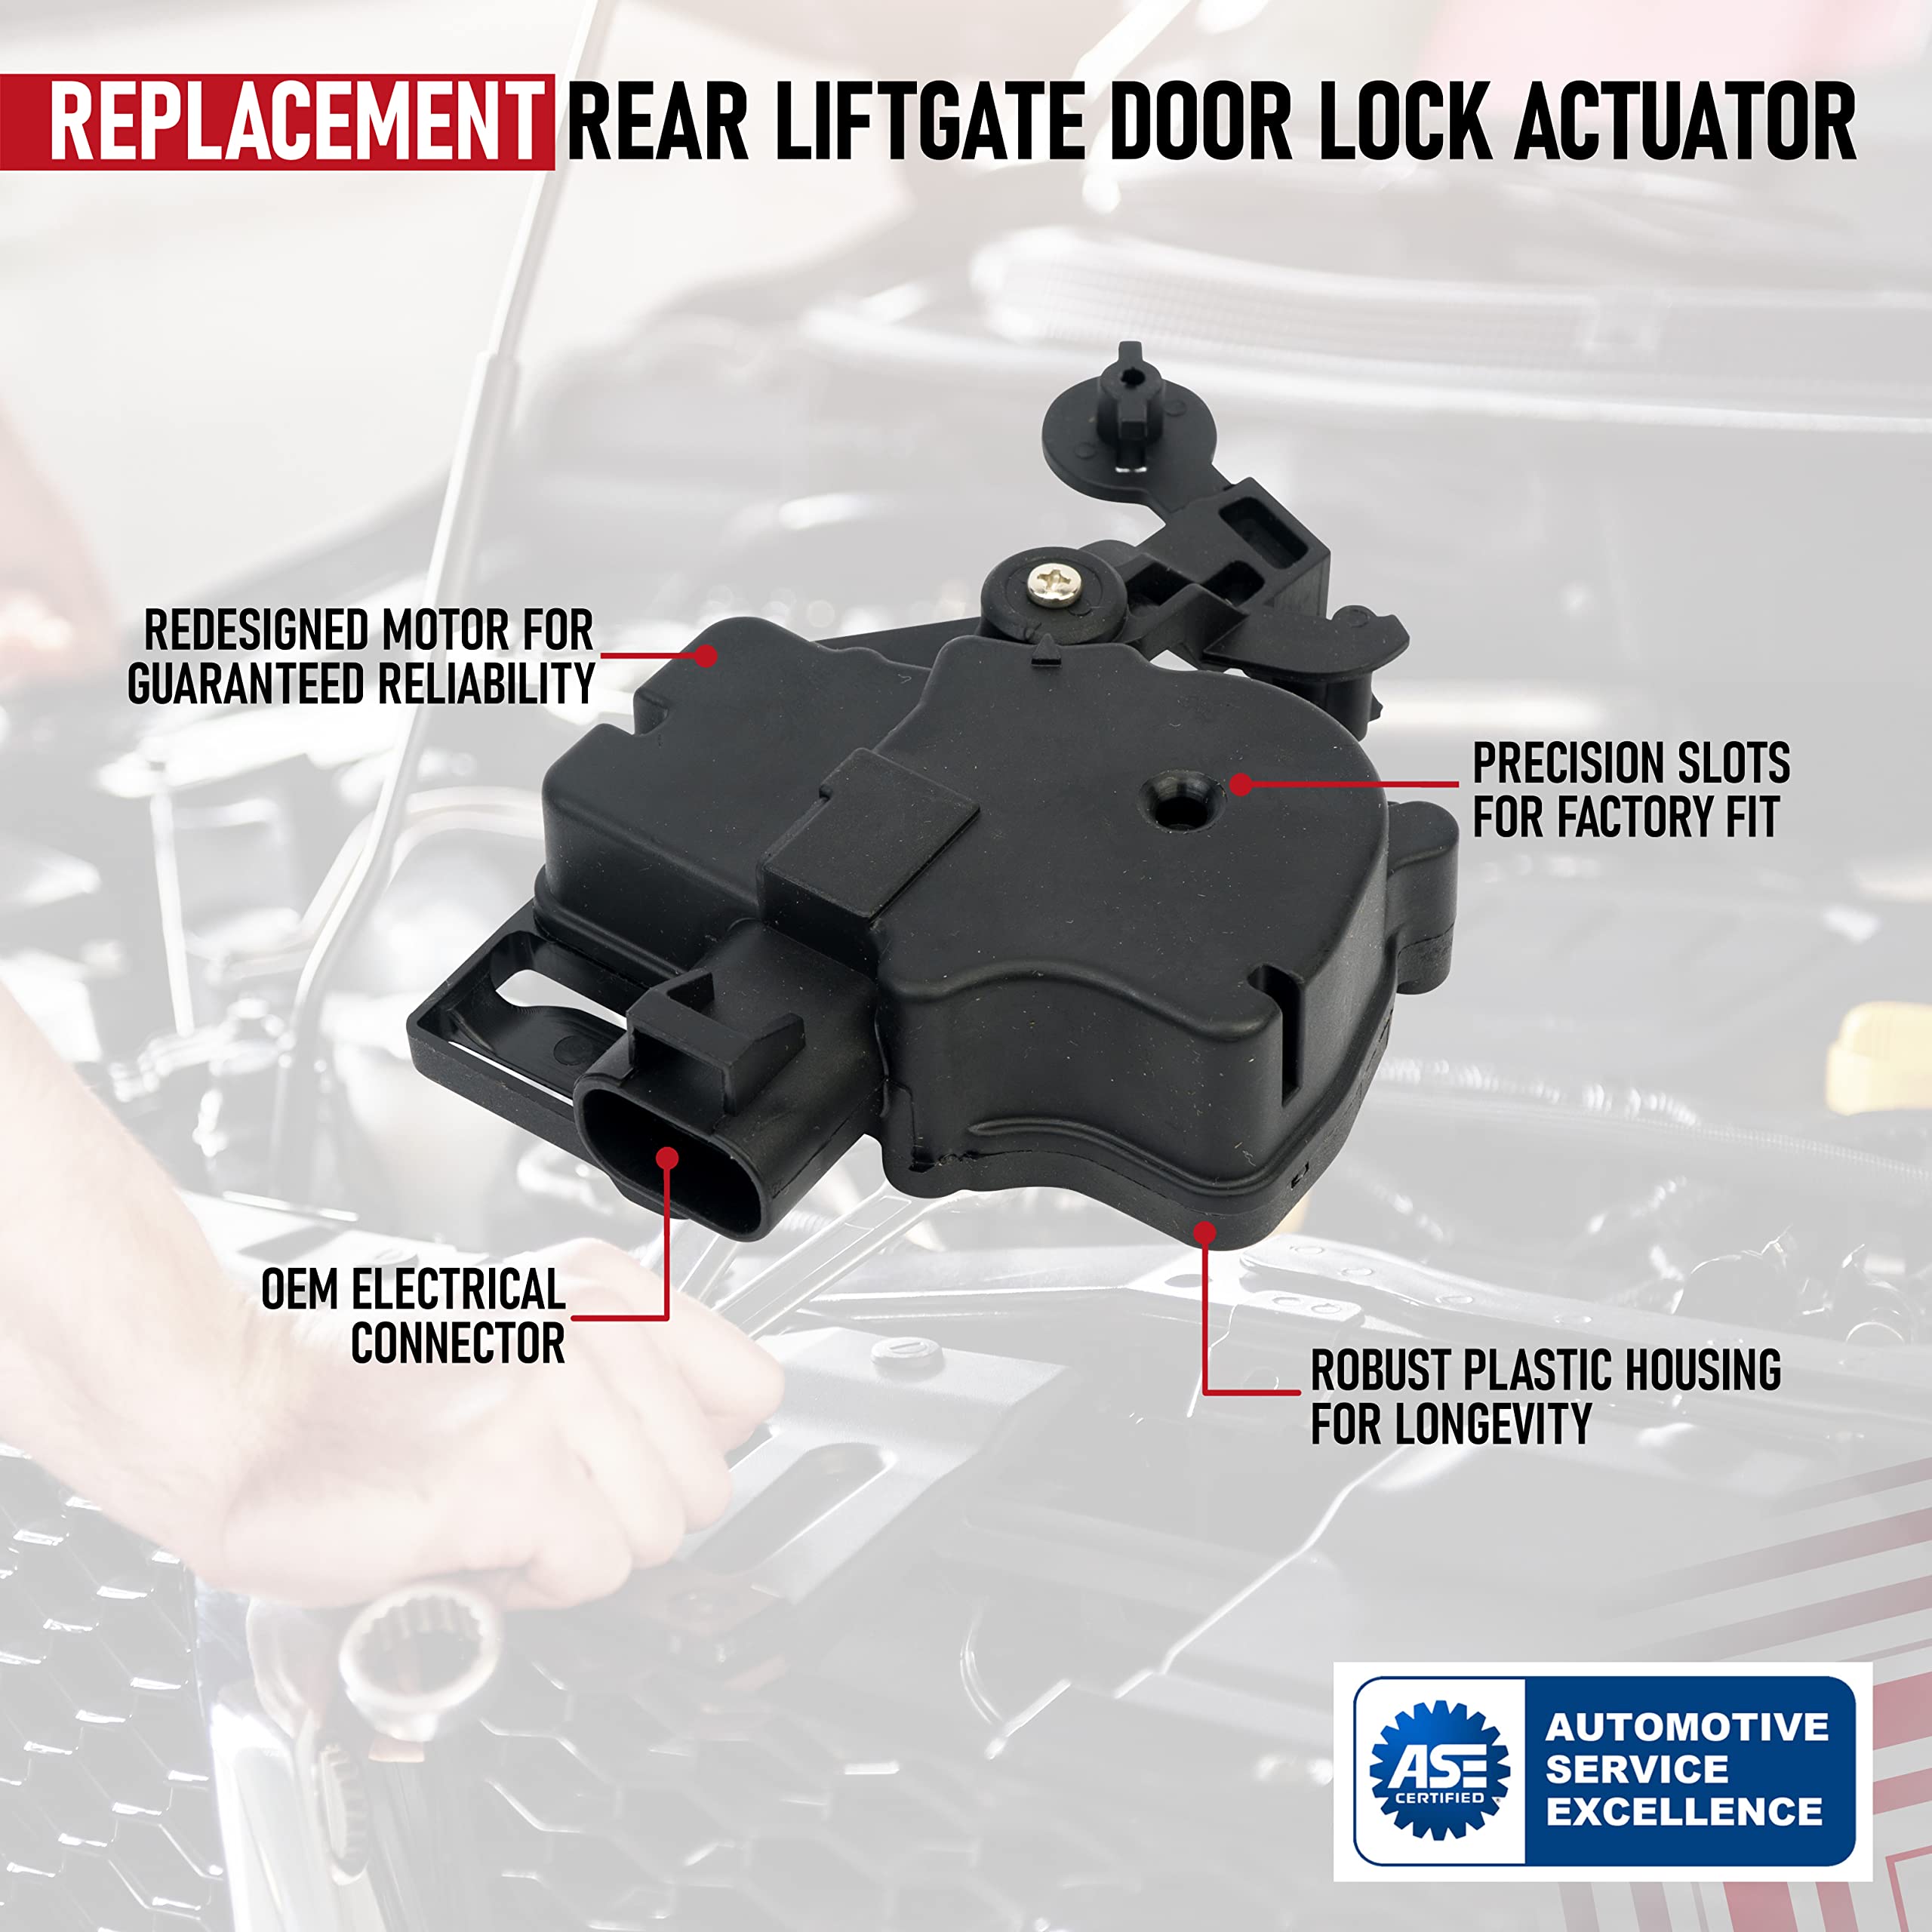 AA Ignition Rear Liftgate Door Lock Actuator - Replaces 15250765, 15808595, 746015, 25001736 - Compatible with Chevy, GMC, Cadillac Vehicles - Tahoe, Suburban, Yukon, Denali, Escalade, ESV, EXT  - Very Good